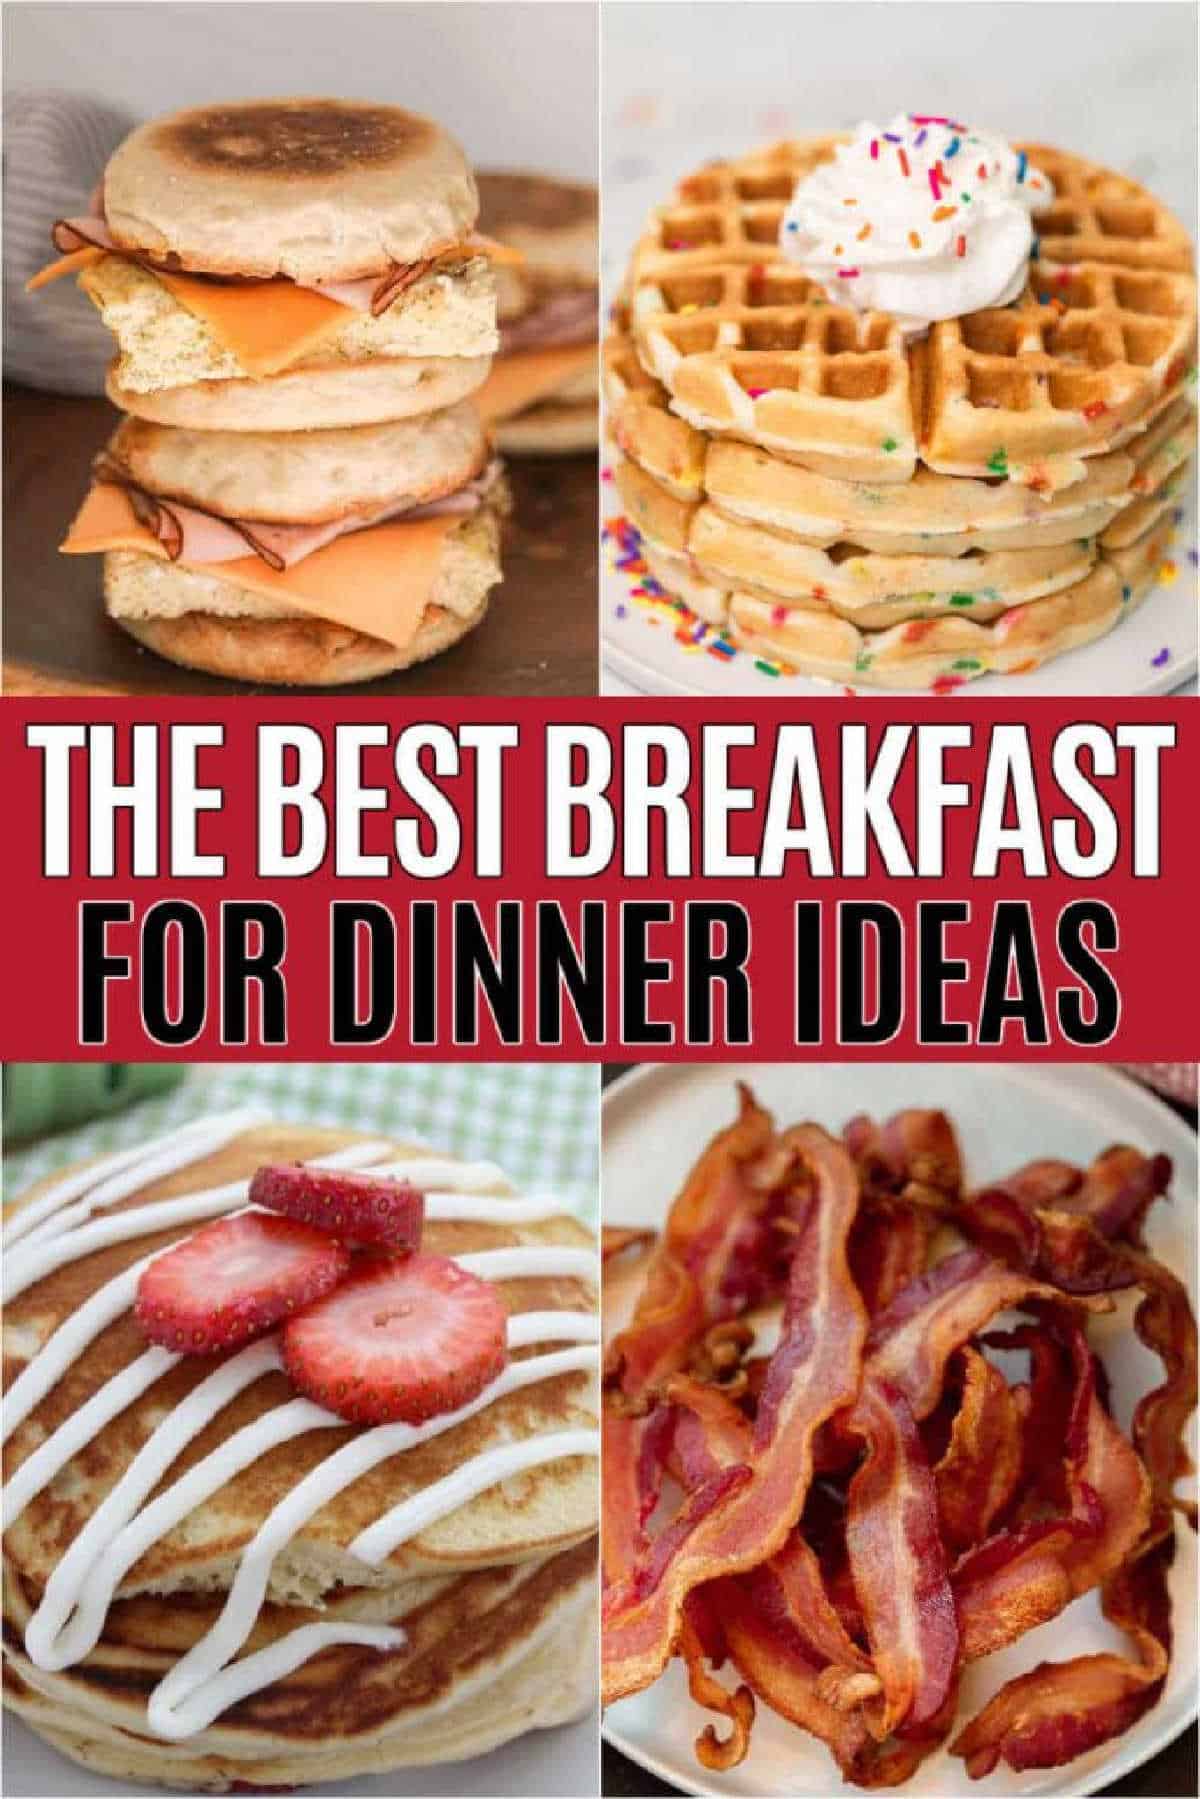 Who else loves breakfast for dinner? These delicious breakfast recipes are the perfect breakfast for dinner ideas. They are easy, healthy and delicious too! I love eating breakfast at night time and these are the perfect recipes to serve! #eatingonadime #breakfastrecipes #breakfastfordinner #easyrecipes 